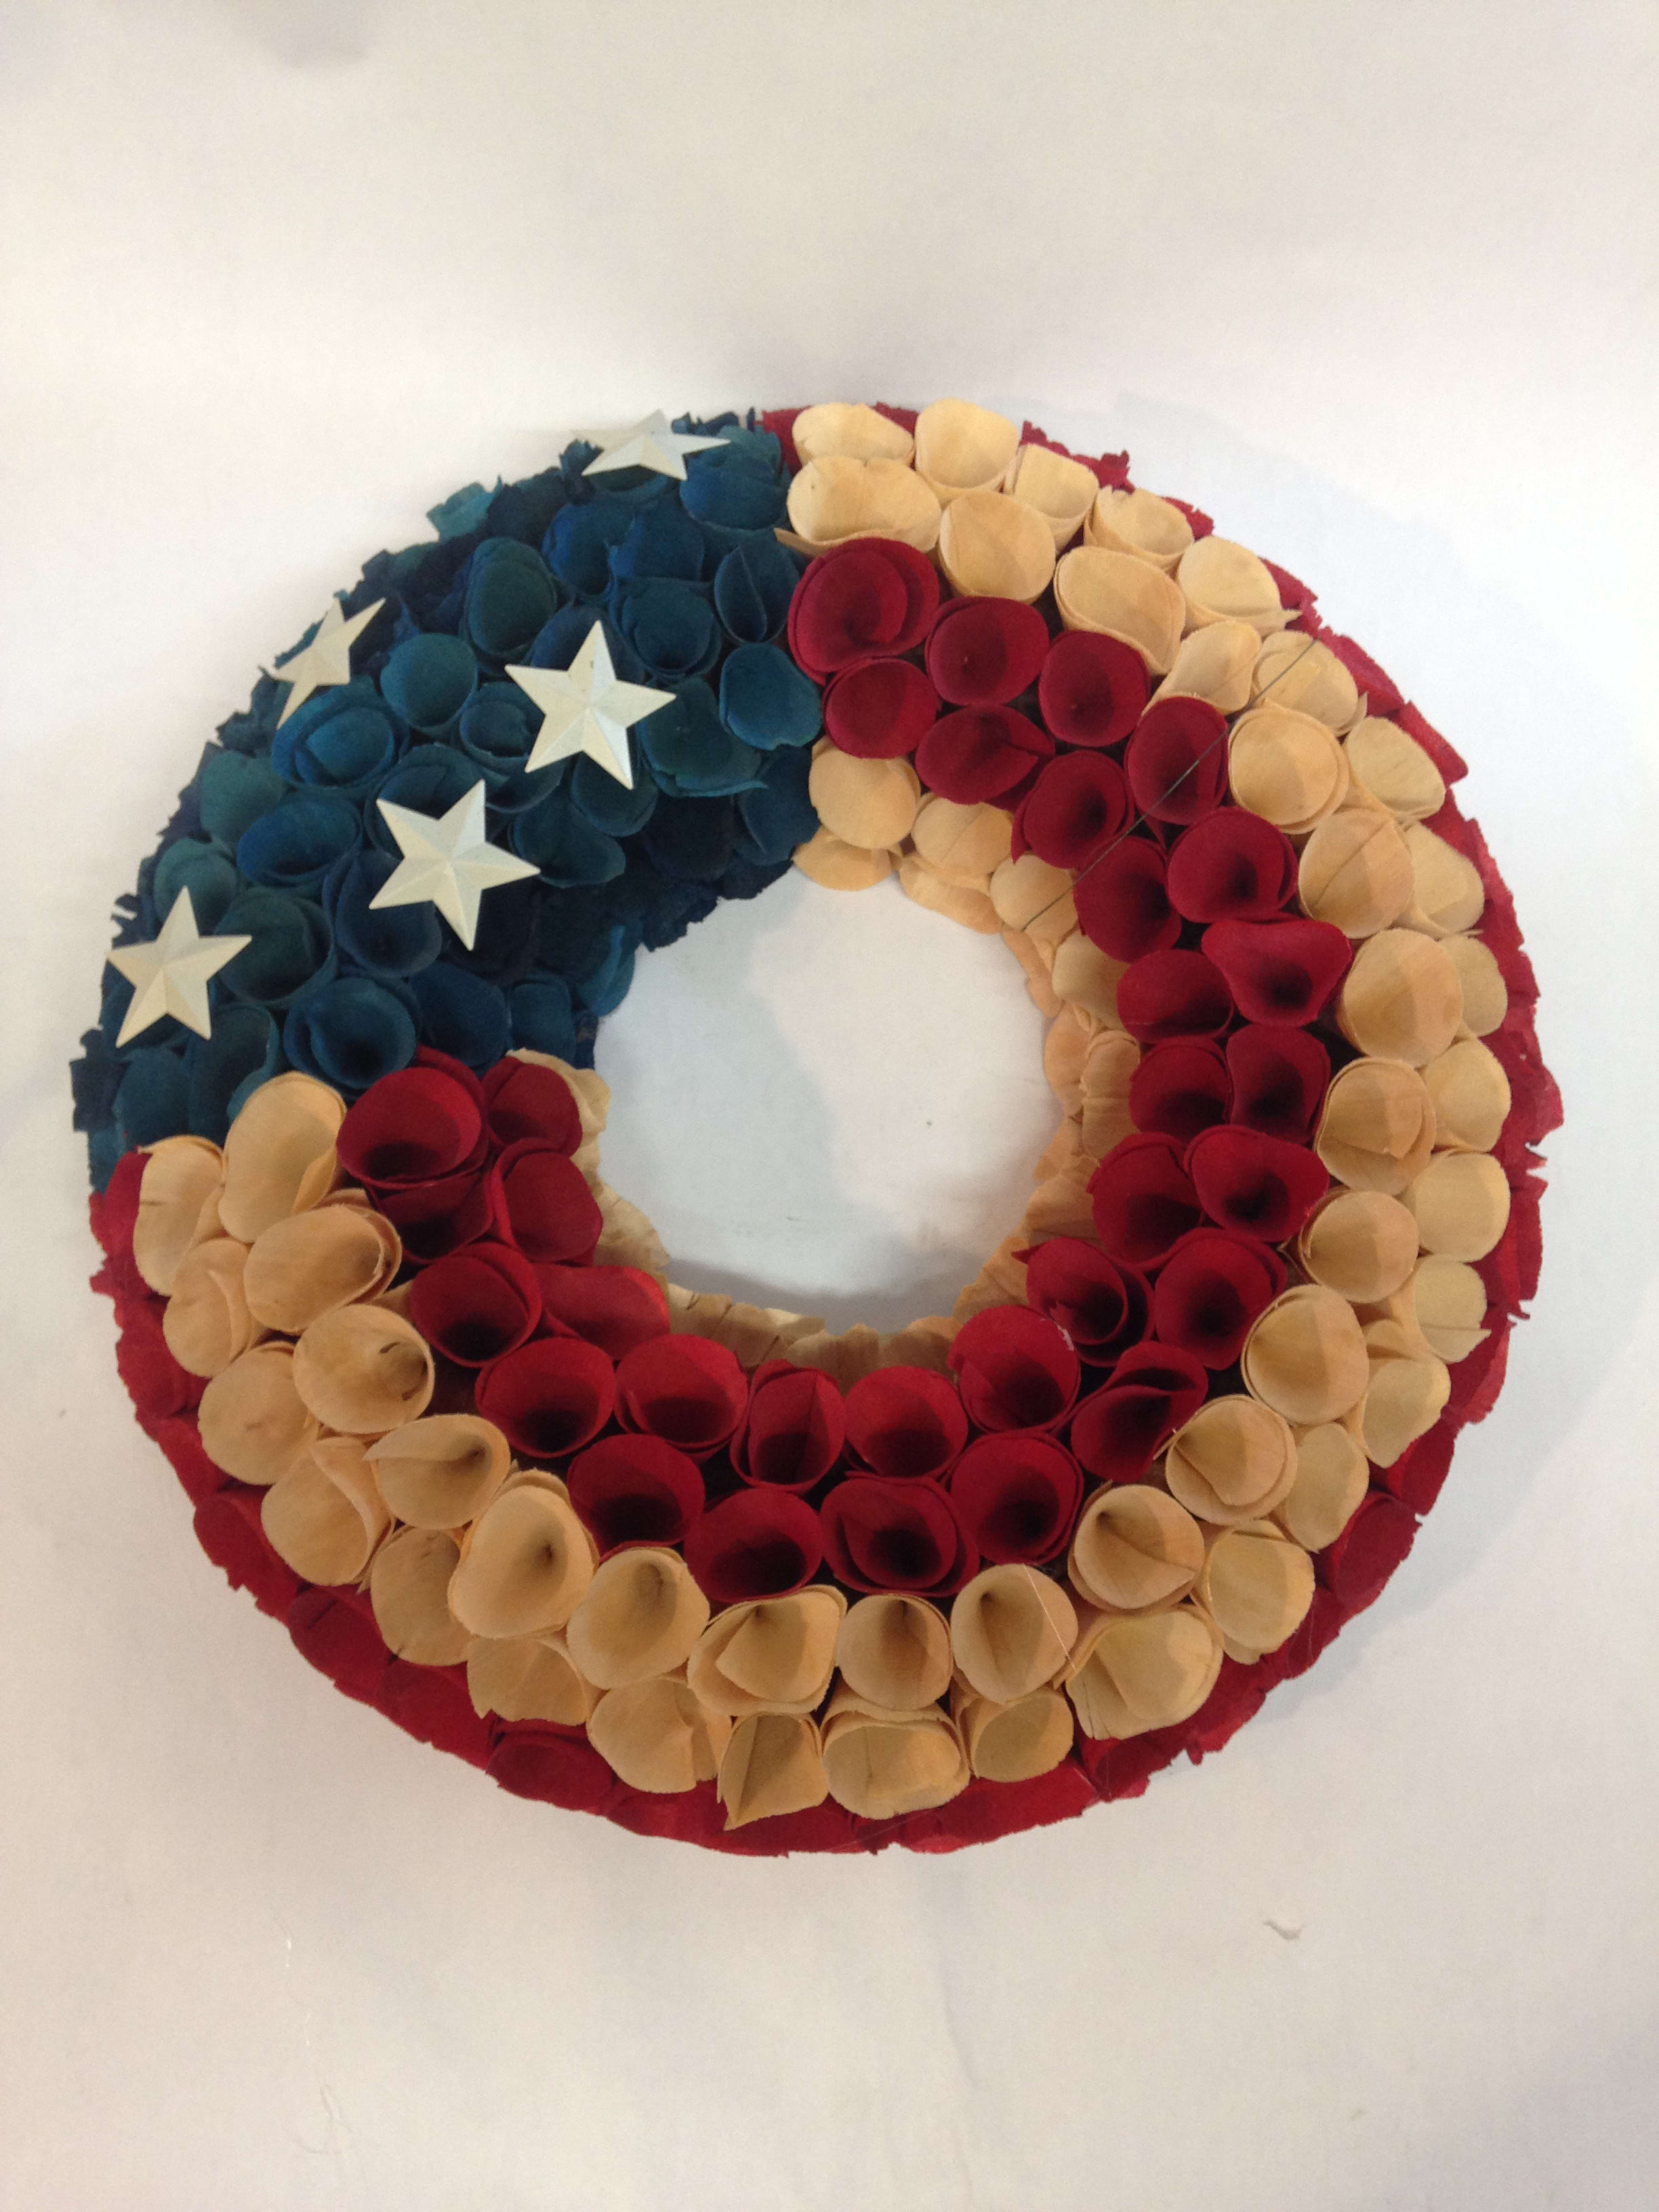 American Flag Pencil Shaving Round Wreath In San Francisco Ca Flowers Of The Valley